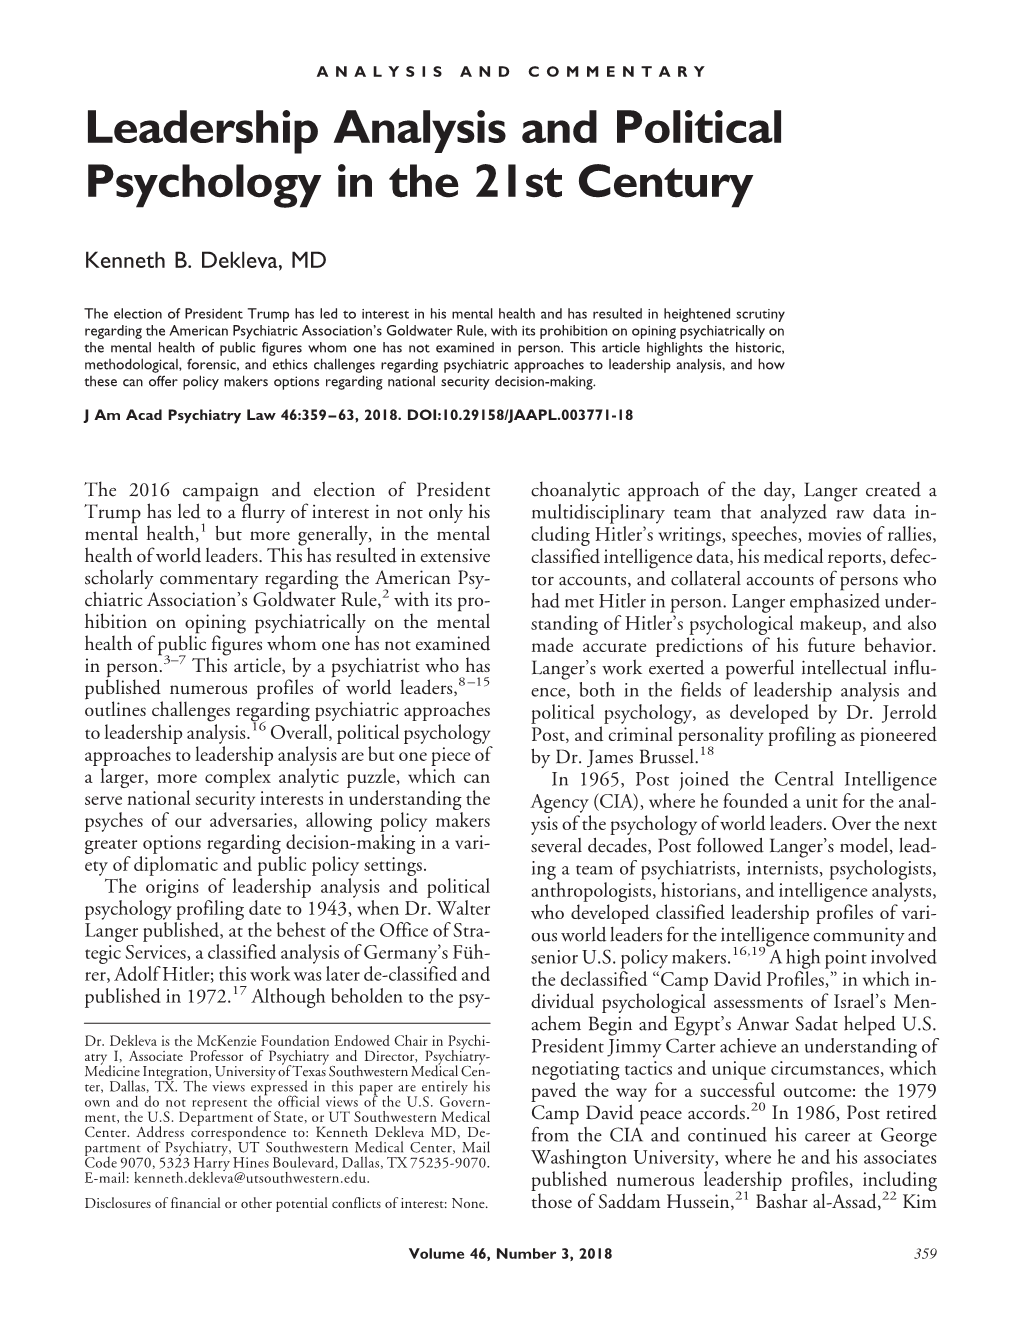 Leadership Analysis and Political Psychology in the 21St Century